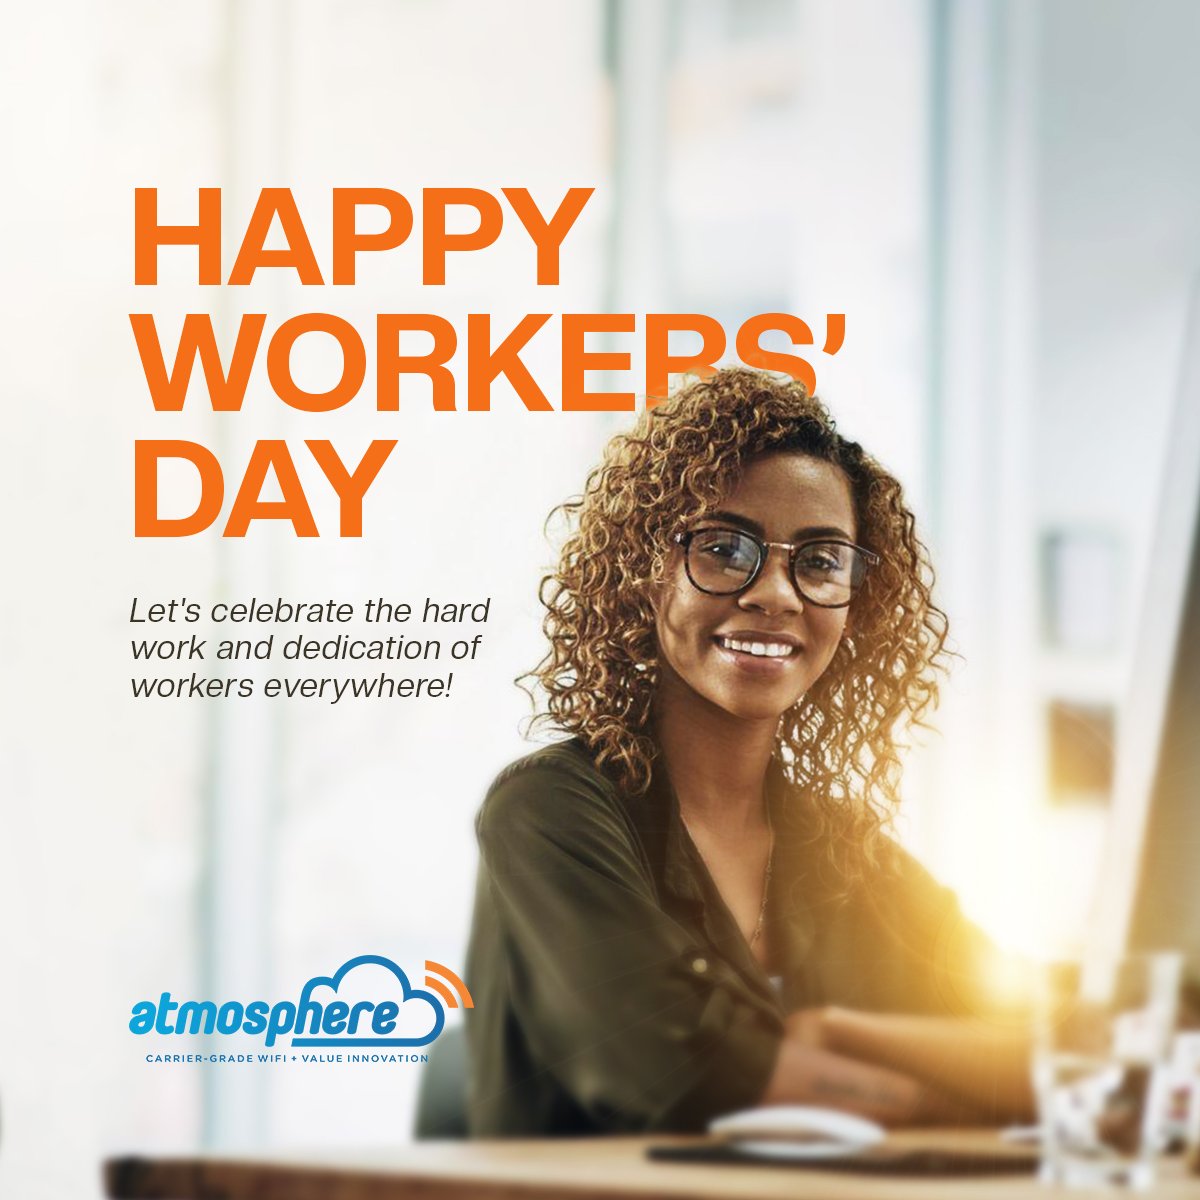 Happy Workers' Day! Cheers to all the hard workers out there making a difference every day! #WorkersDay #workersday2024